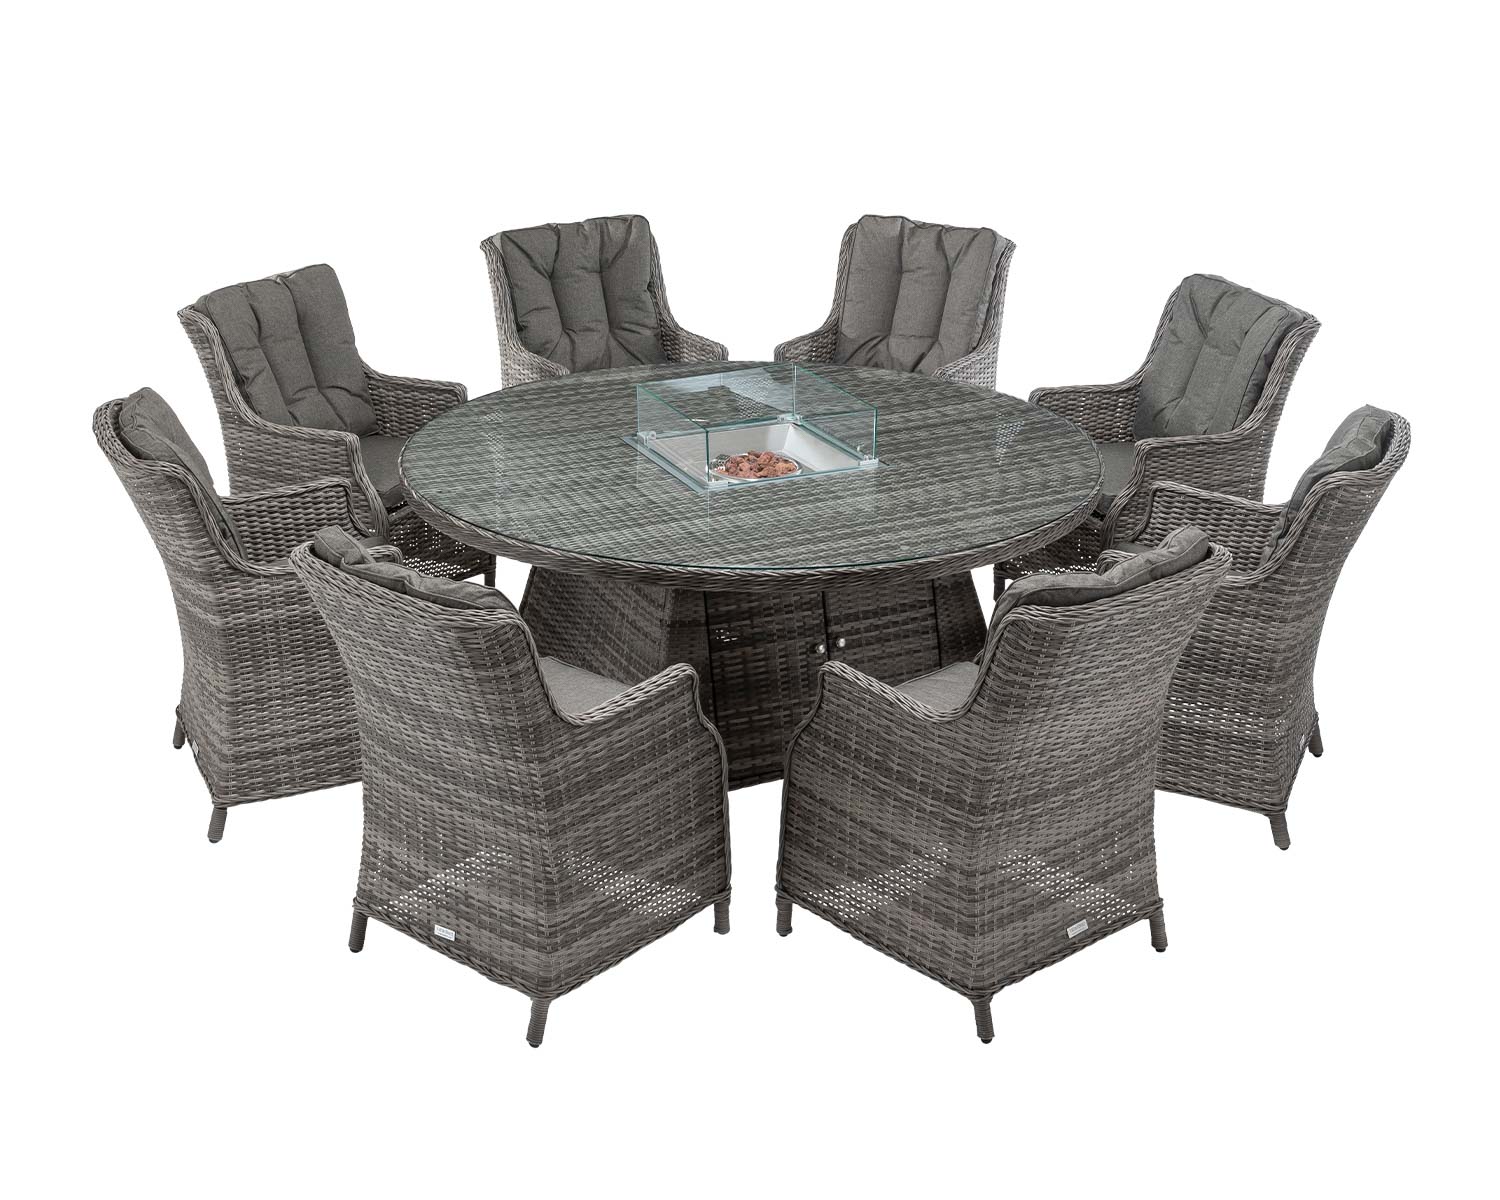 8 Seater Rattan Garden Dining Set With Large Round Table In Grey With Fire Pit Riviera Rattan Direct